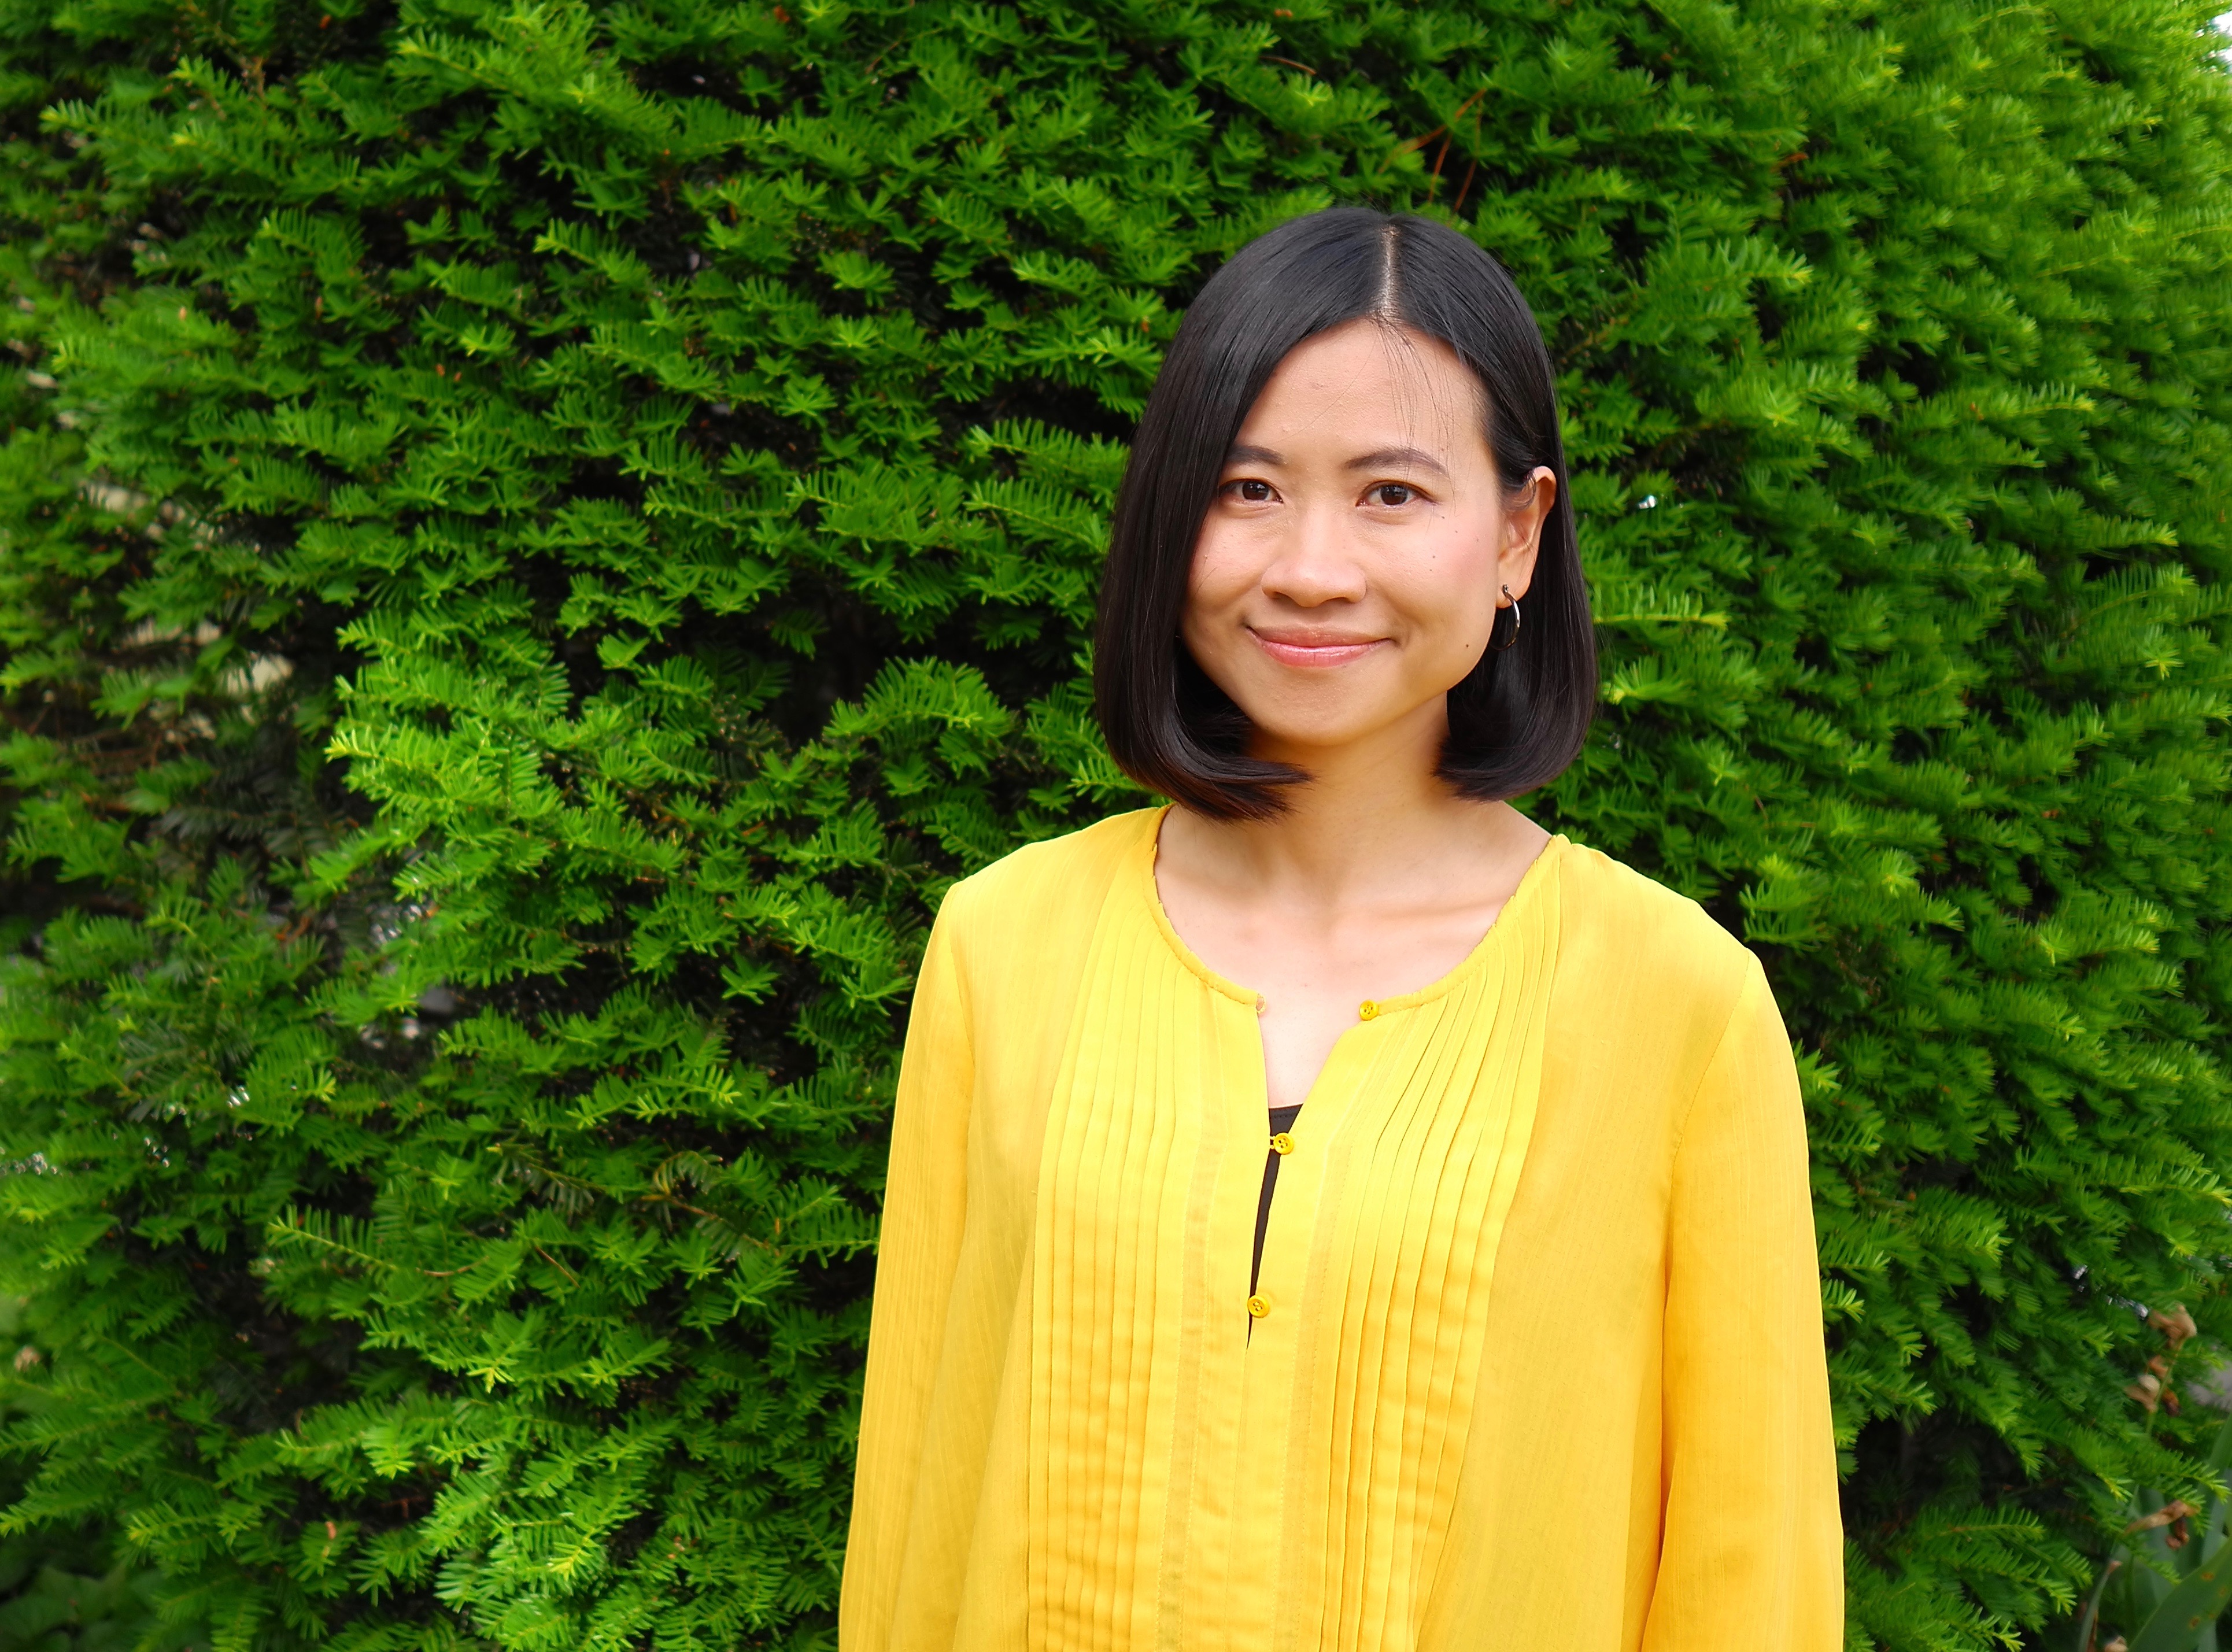 Graduate student Kongjing Xing wears a bright yellow shirt standing in front of a leafy, green tree